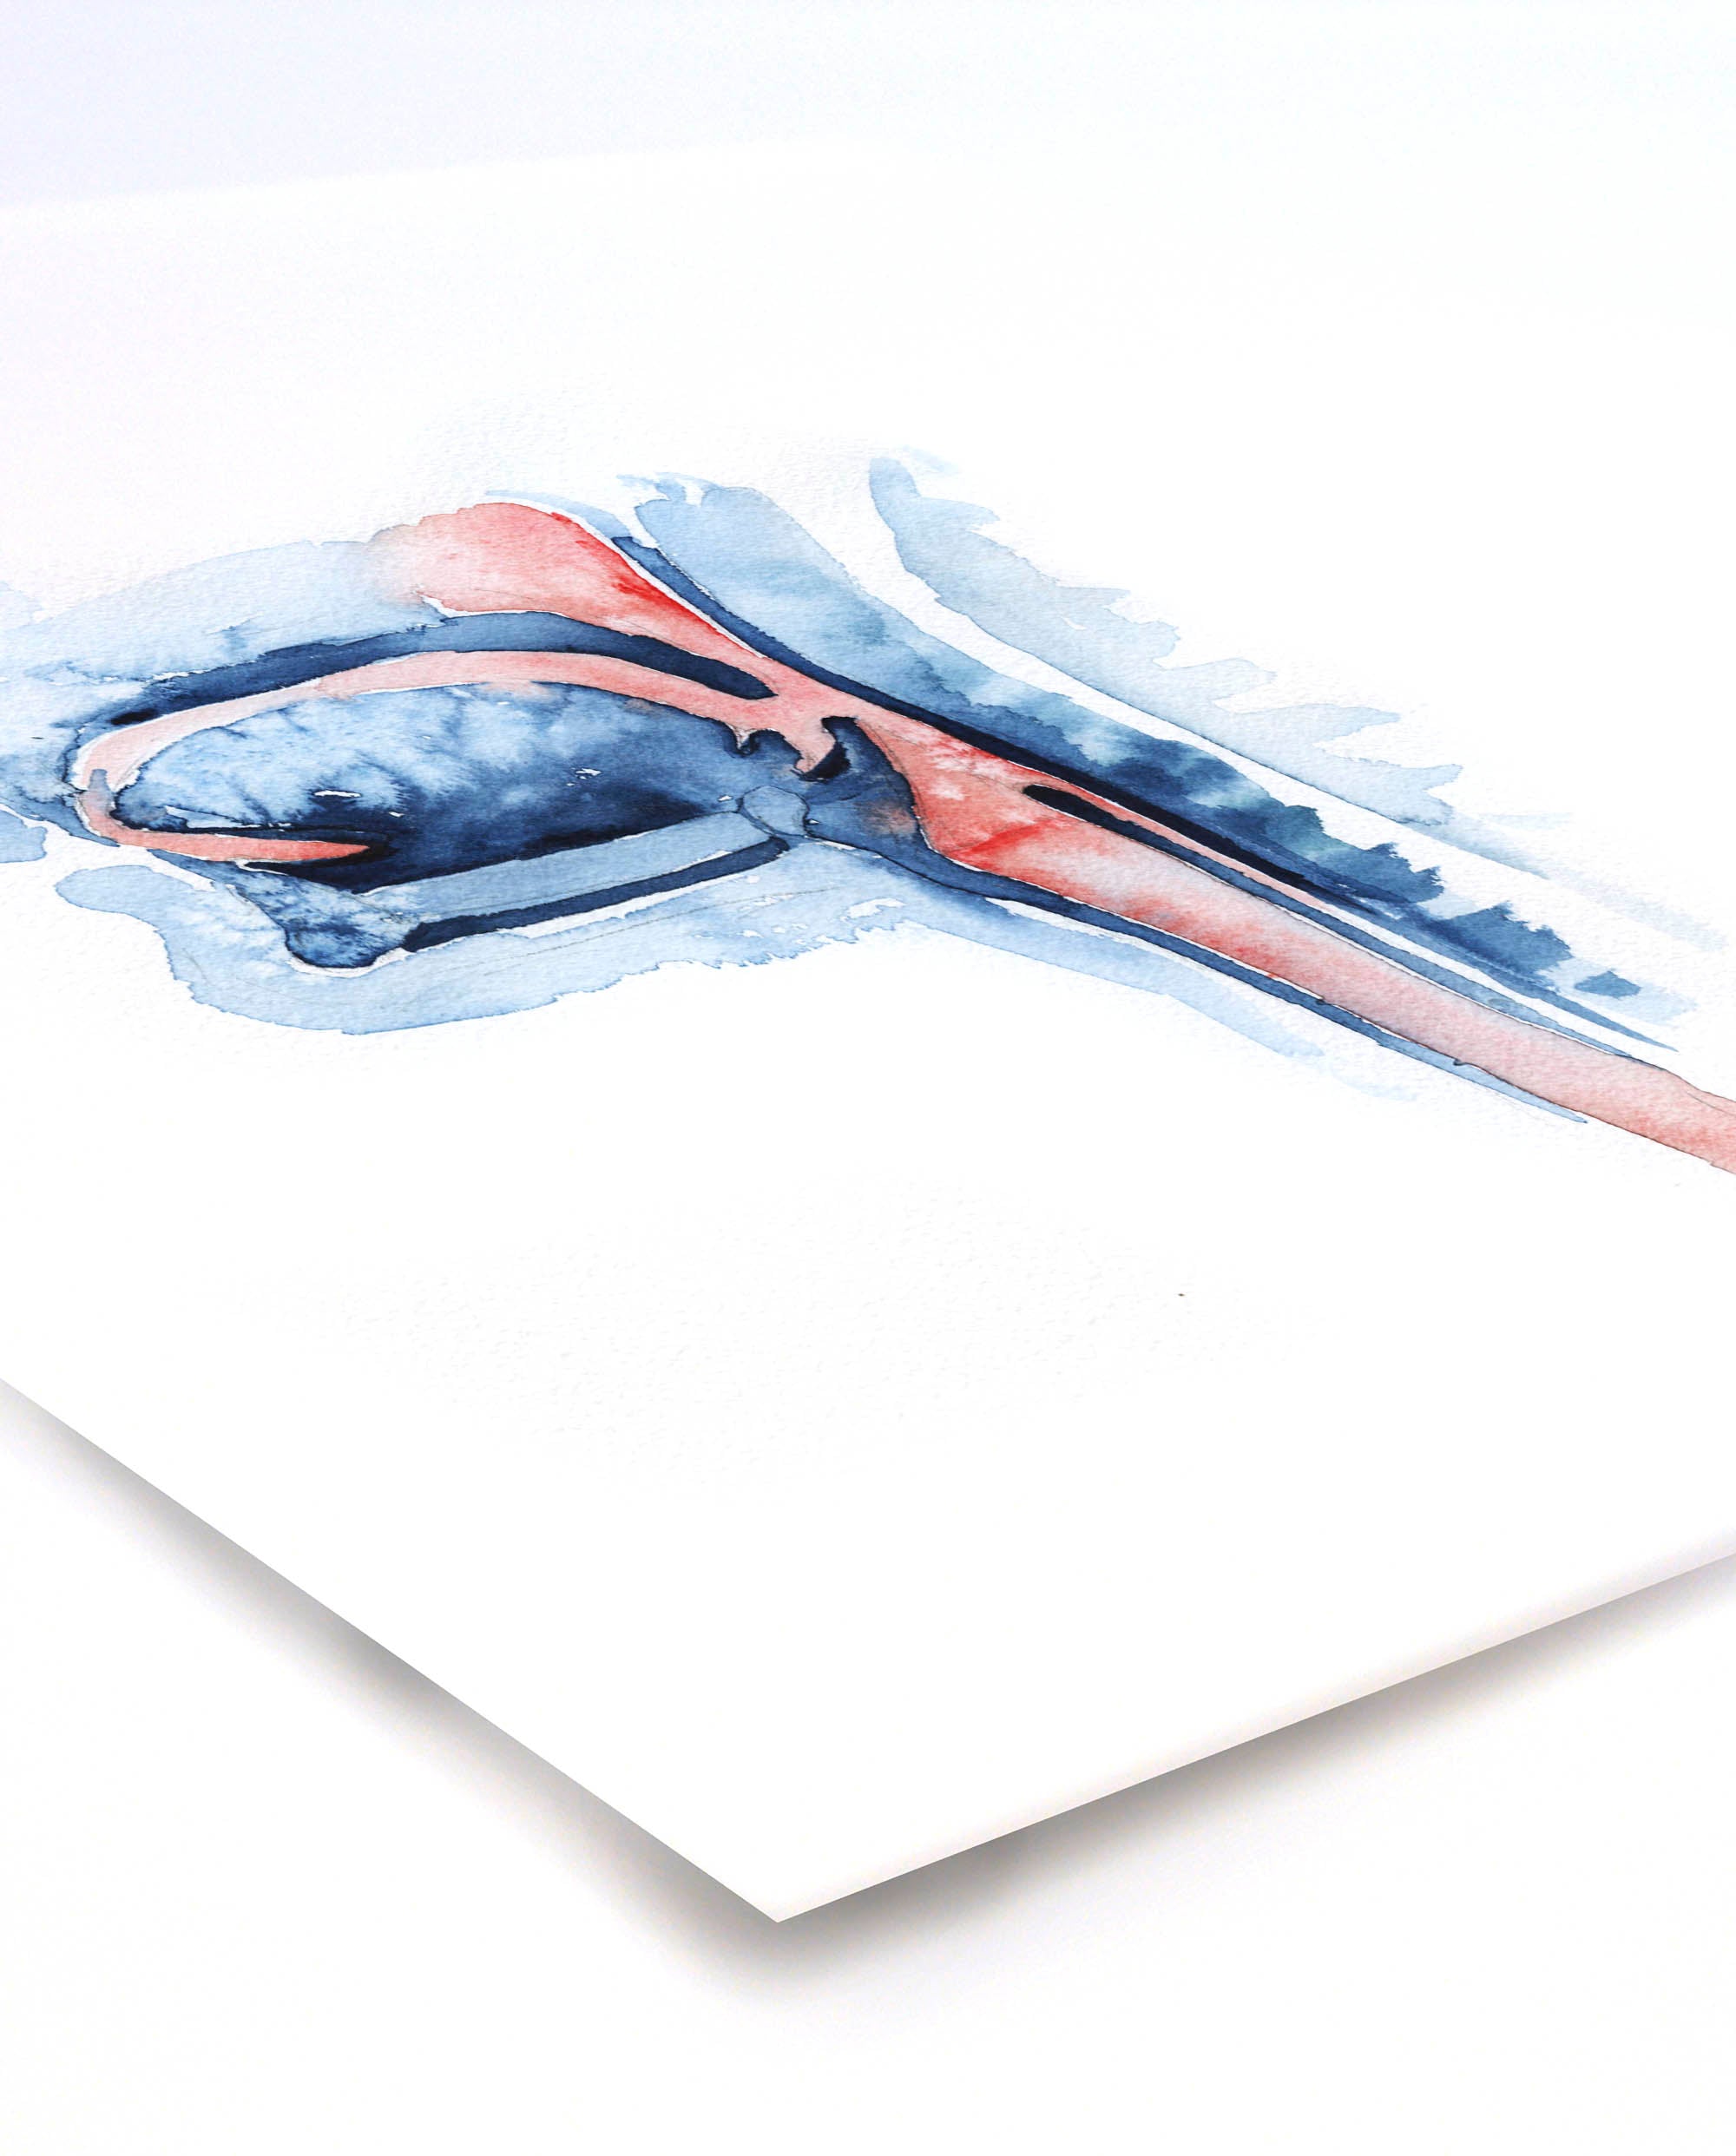 Unframed watercolor painting showing a swallowing mechanism with mouth, throat and tongue in prints and blues. The painting is at an angle to see the details of the painting and texture of the paper.